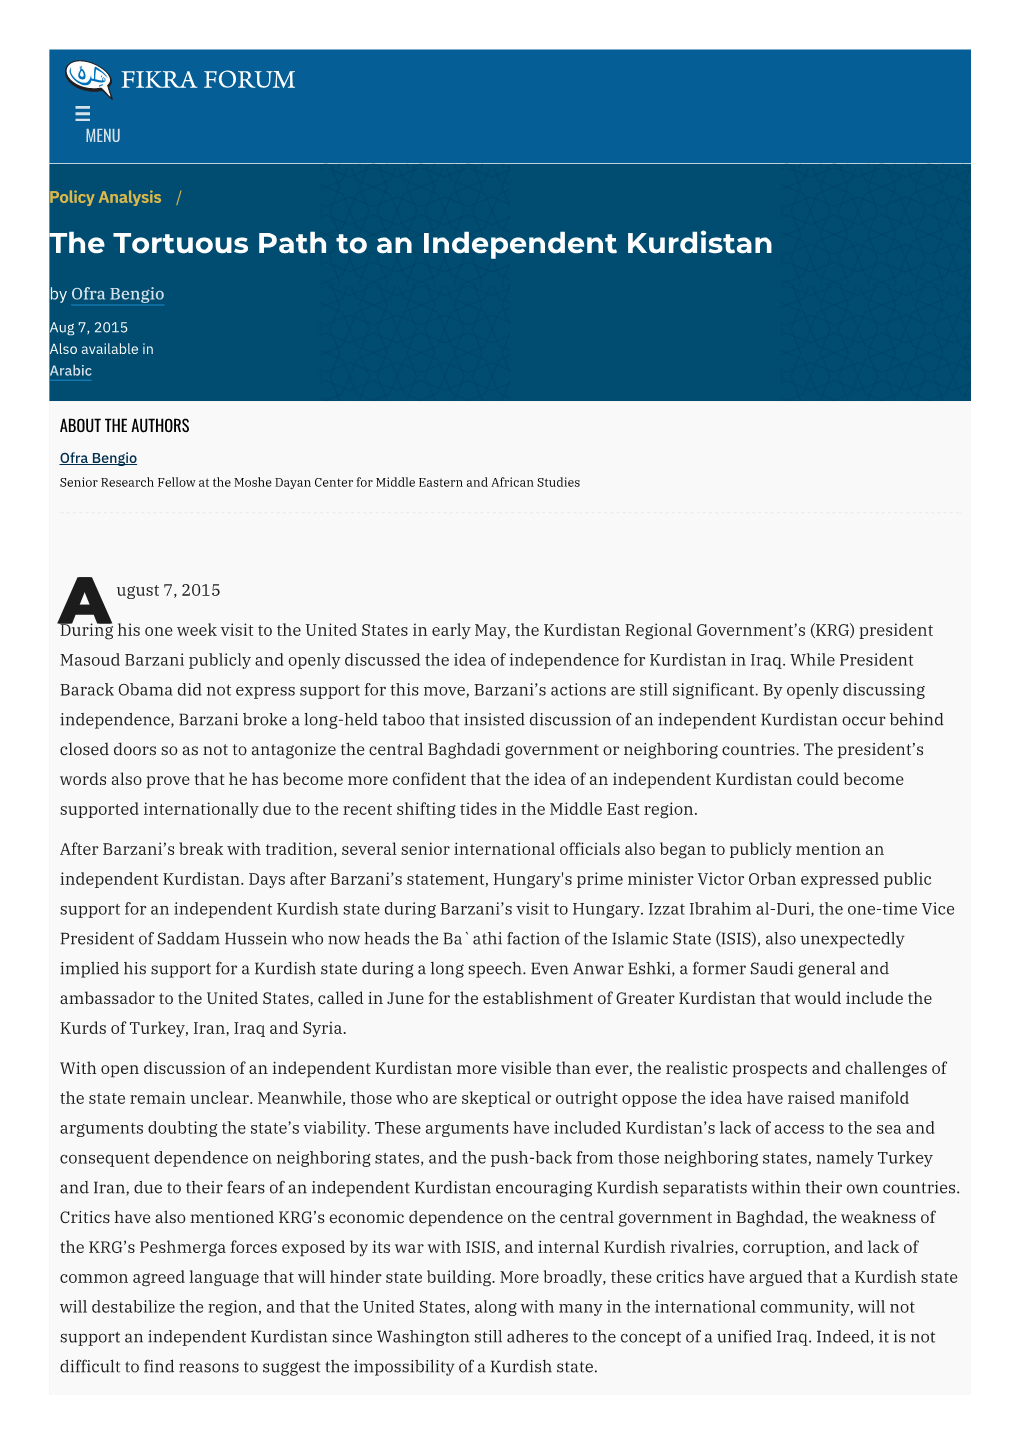 The Tortuous Path to an Independent Kurdistan | the Washington Institute